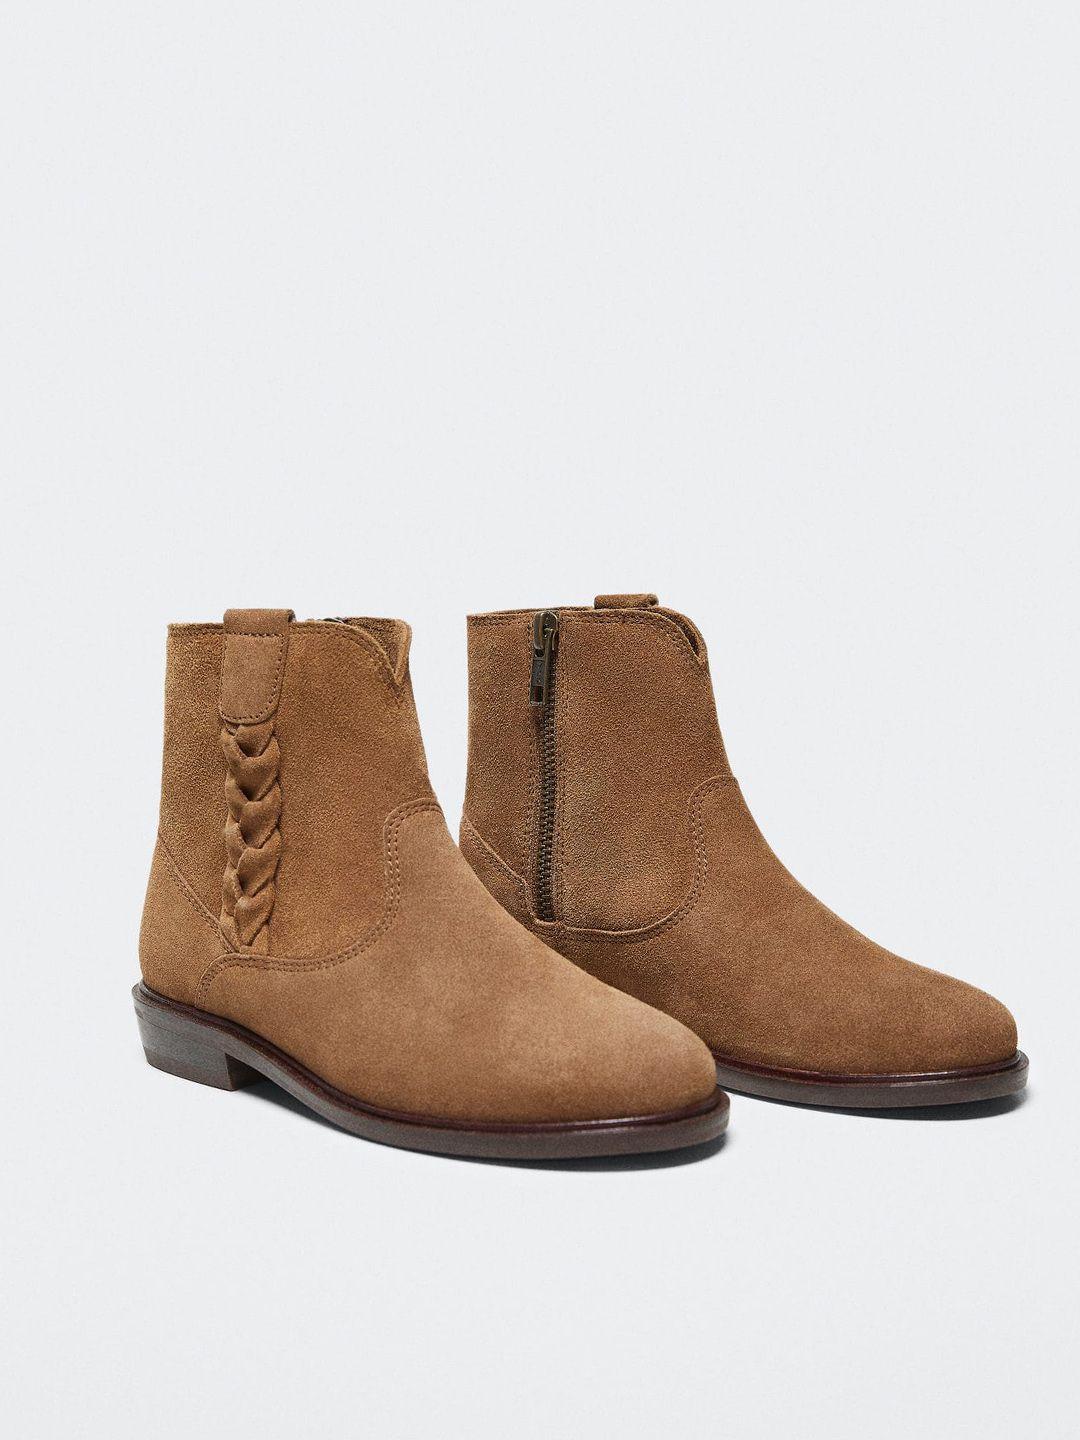 mango-kids-girls-brown-solid-leather-sustainable-boots